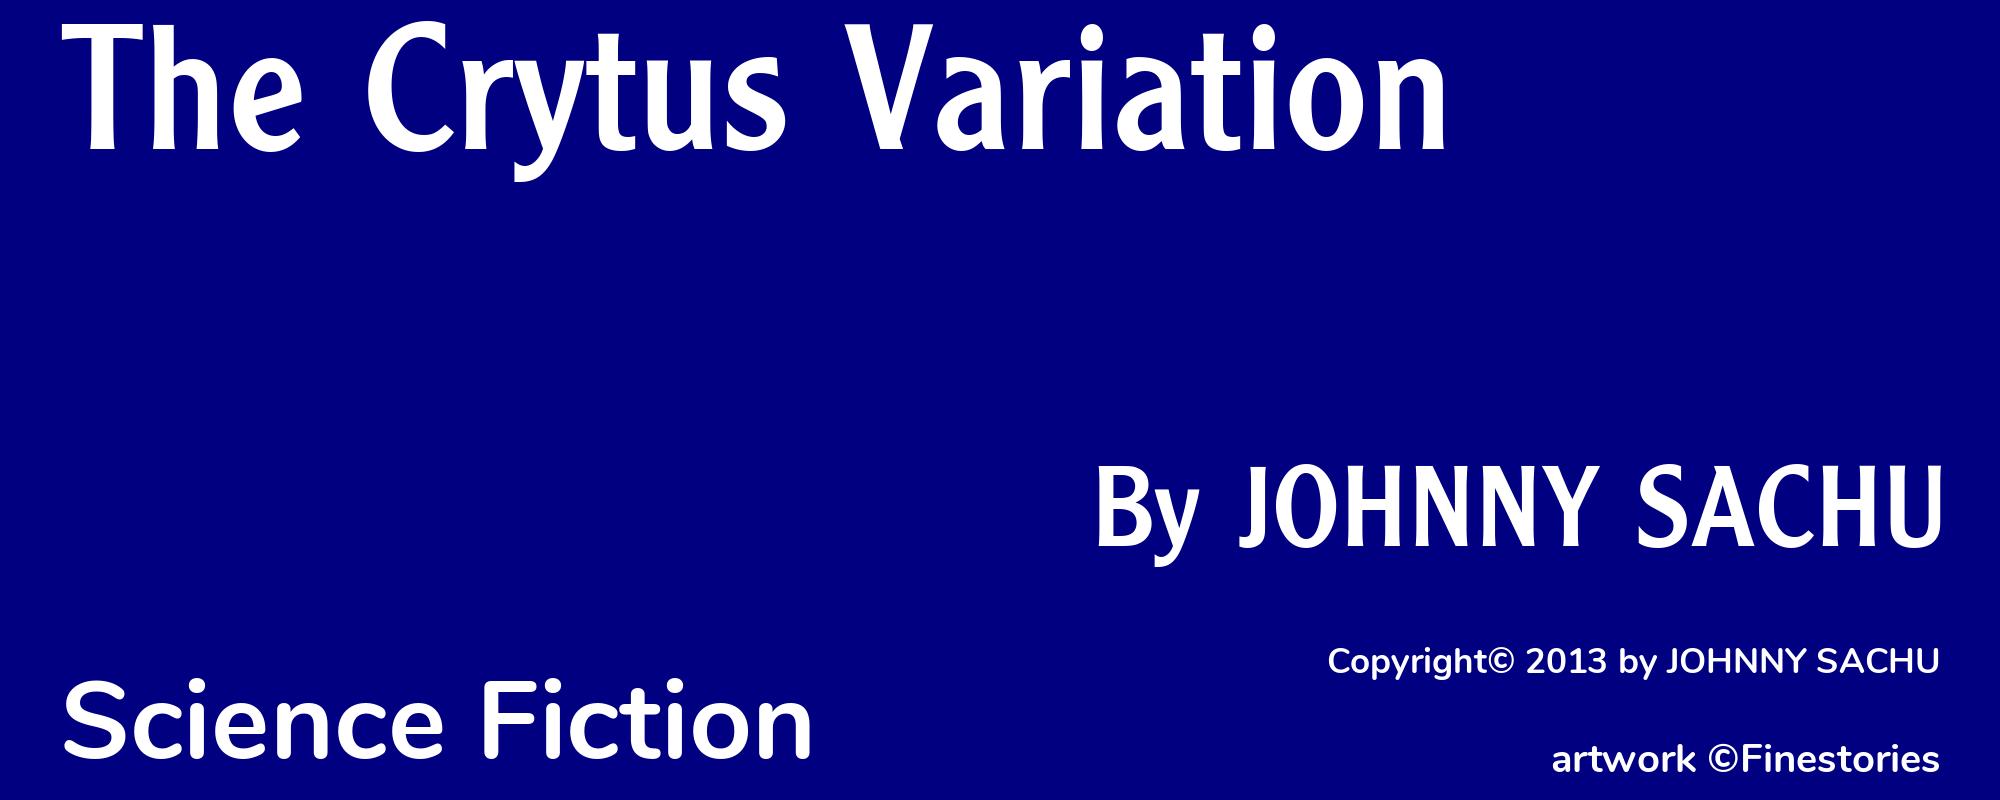 The Crytus Variation - Cover